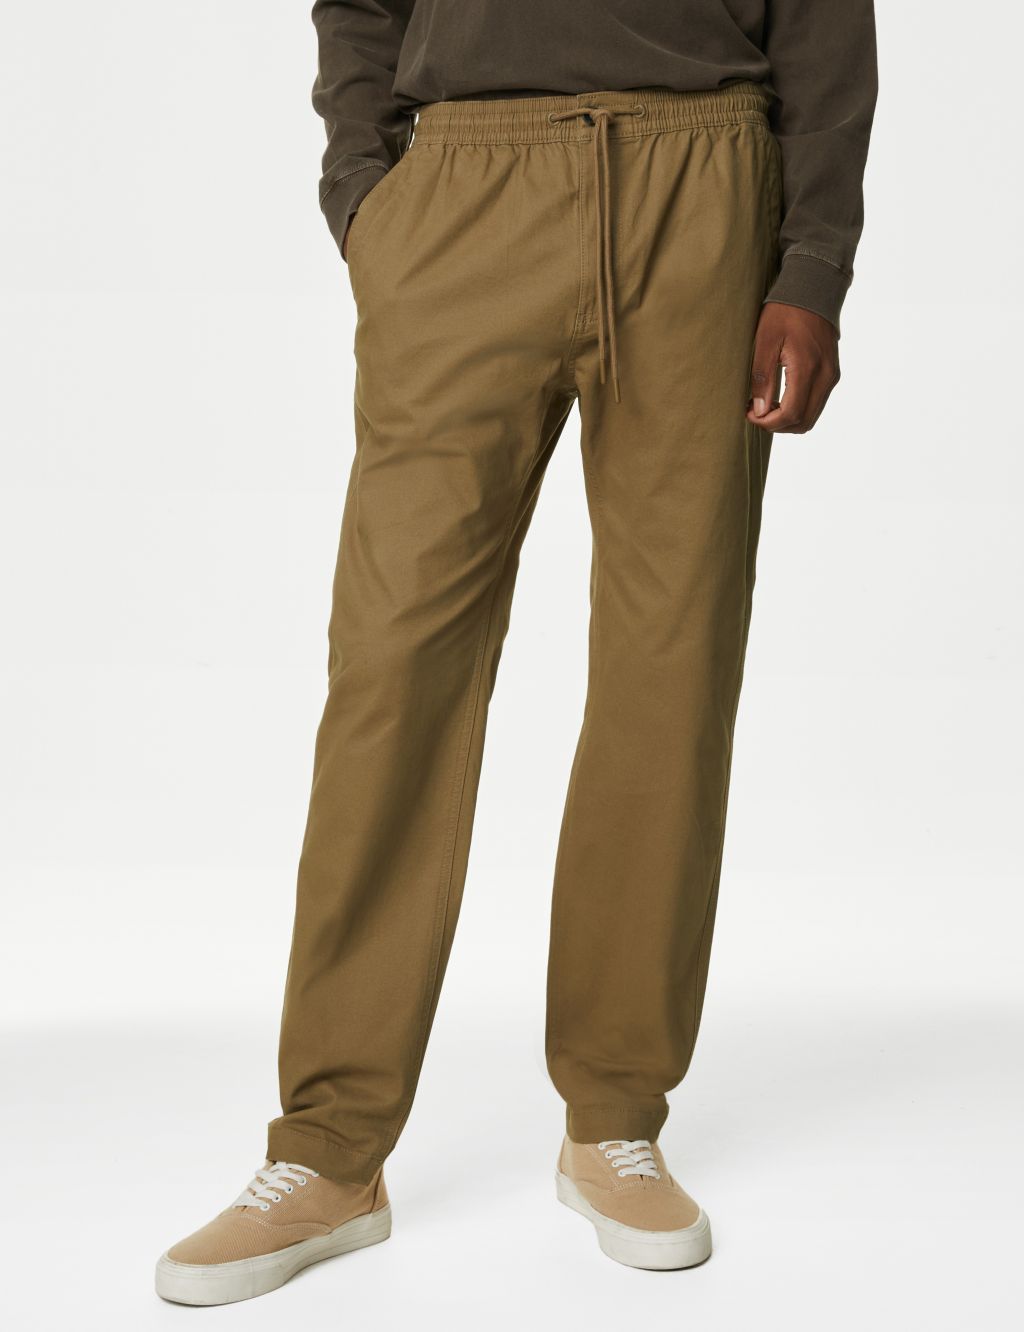 Tapered Fit Elasticated Waist Stretch Trousers image 1